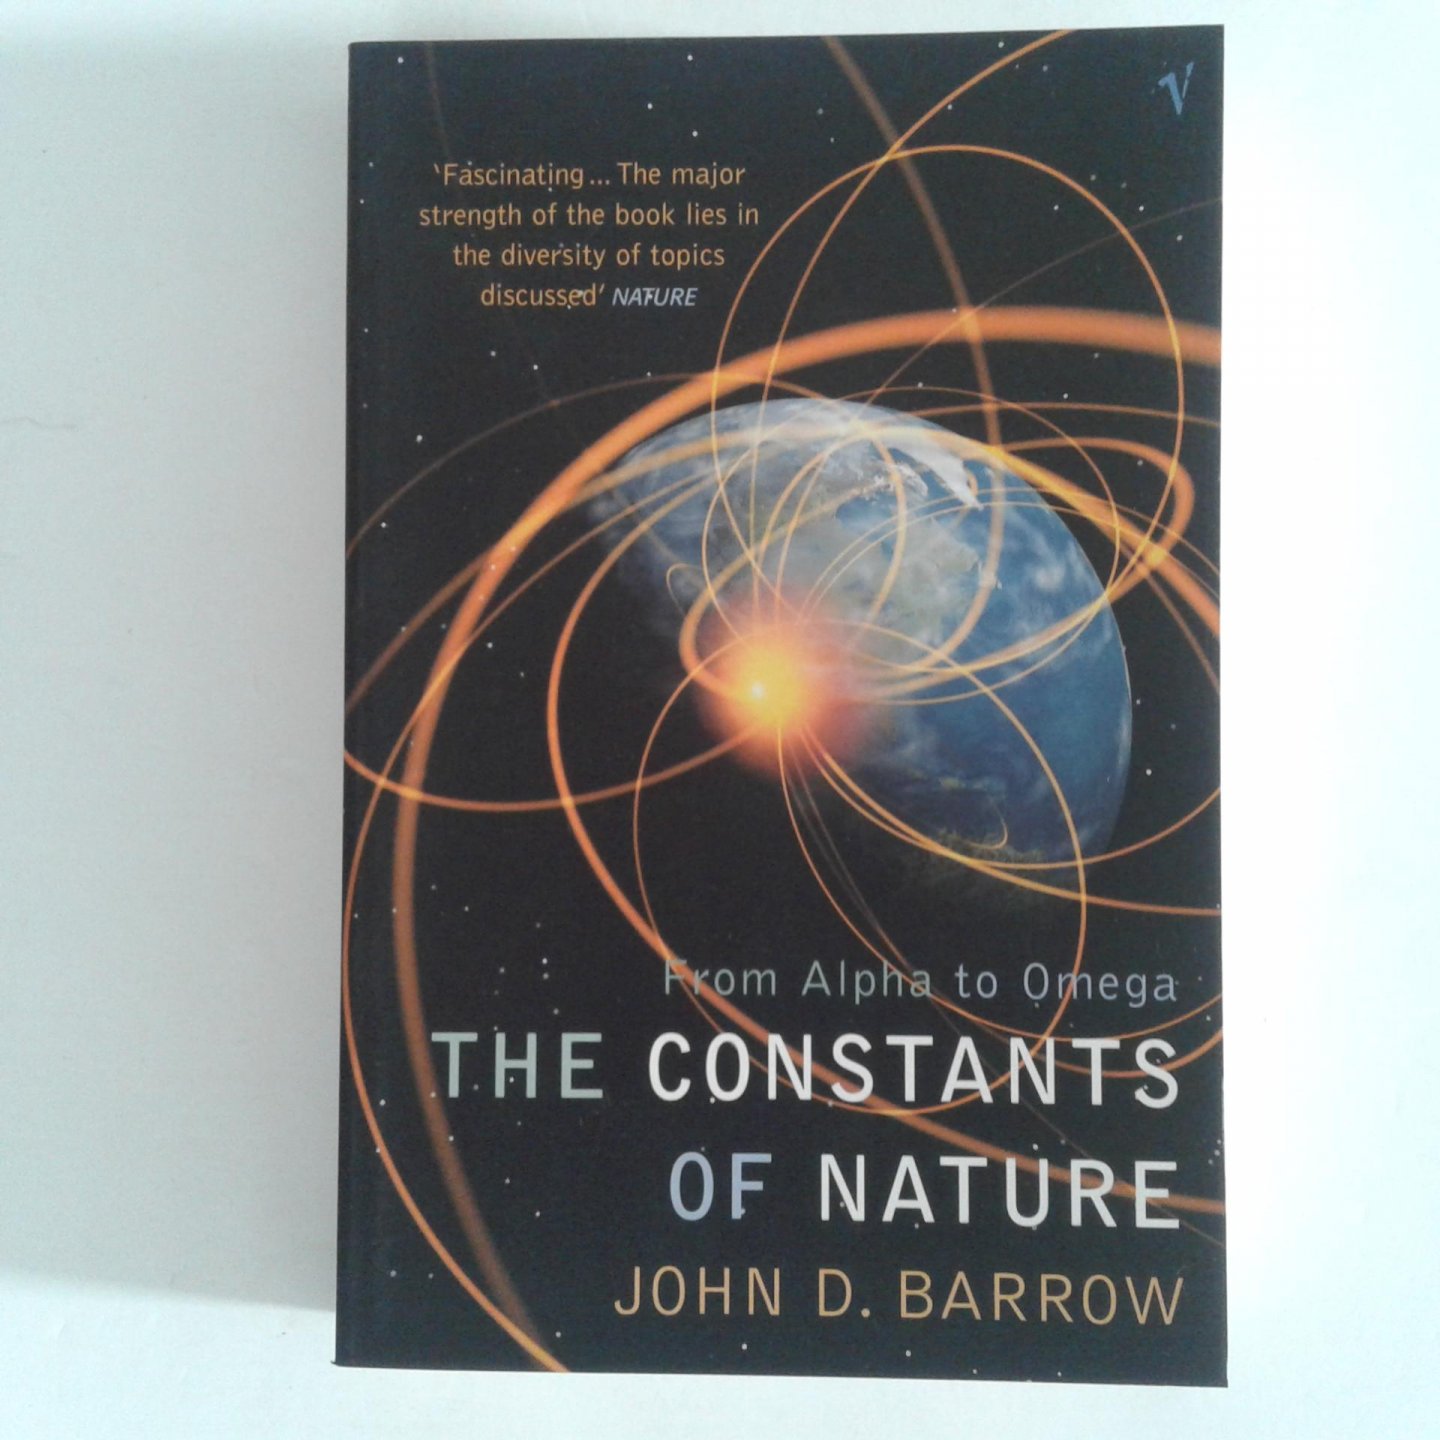 Barrow, John D. - The Constants of Nature ; From Alpha to Omega